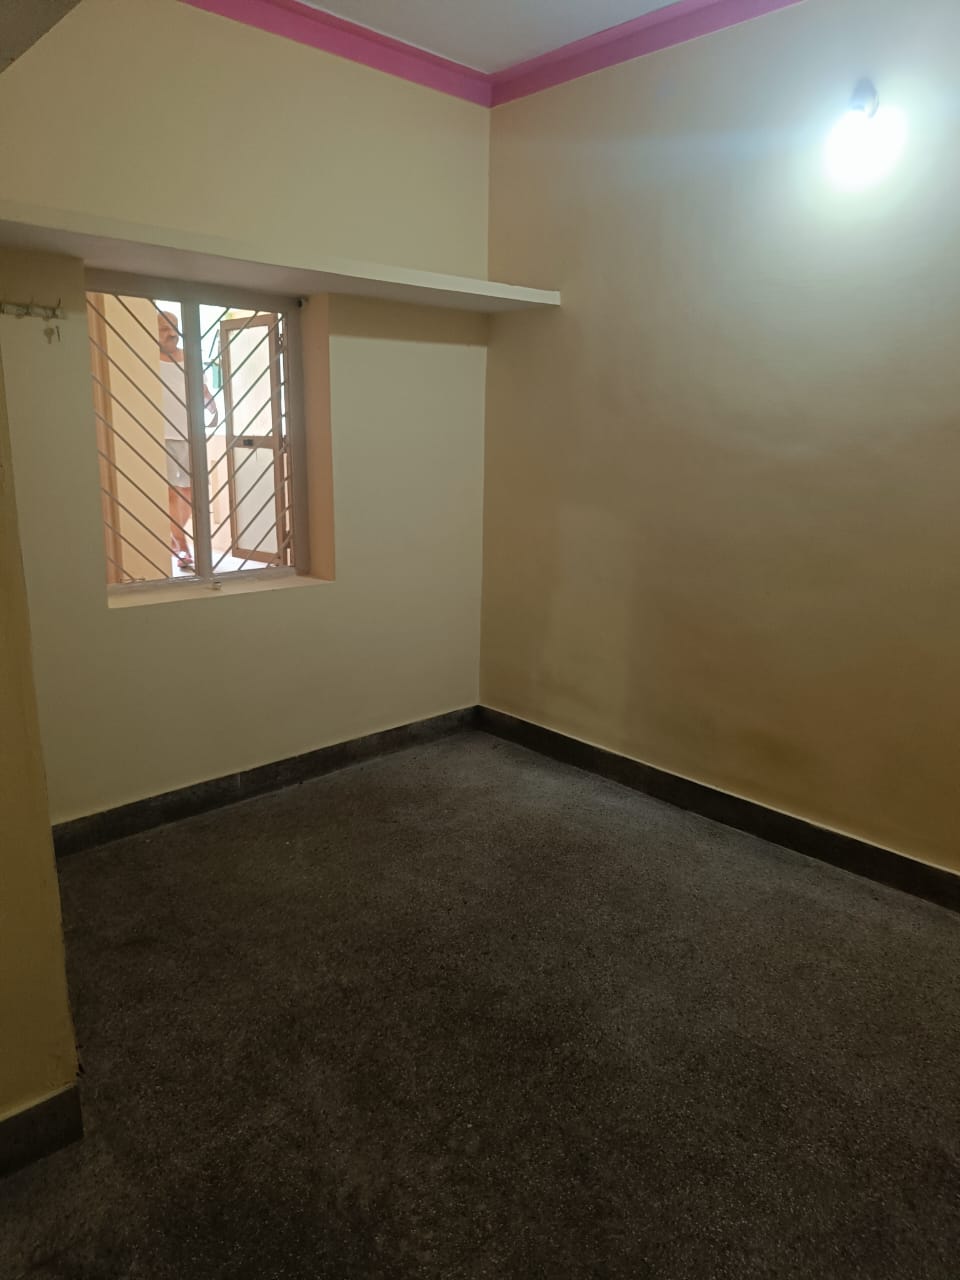 2 BHK Independent House for Lease Only at JAML2 - 4930-20lakh in Anche Palya